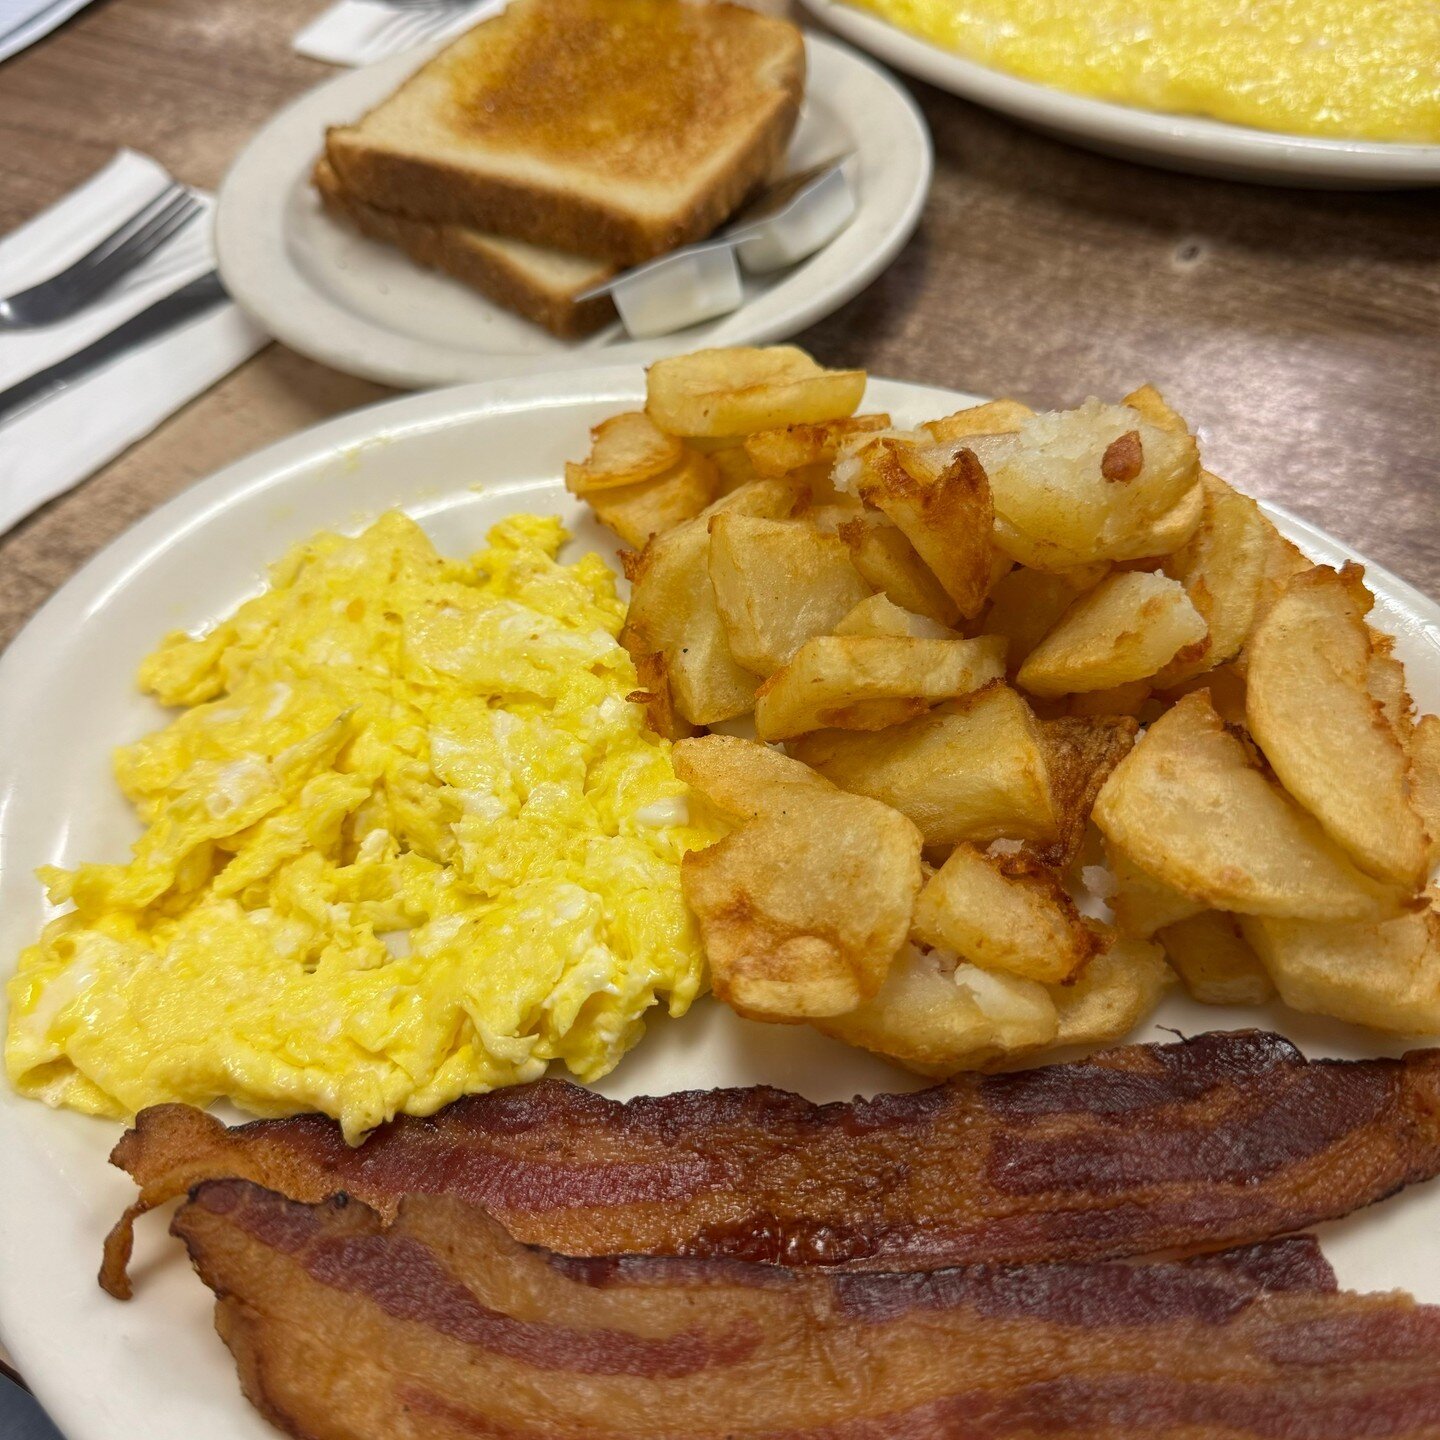 Breakfast, the best way to start a blessed day! What a beautiful day it&rsquo;s going to be, too!
🍳 🍞 🥓 
Photo by high school senior, Brittin, who was doing a marketing job shadow day and stopped by here!
#bigbreakfast #nashvillebreakfast #country